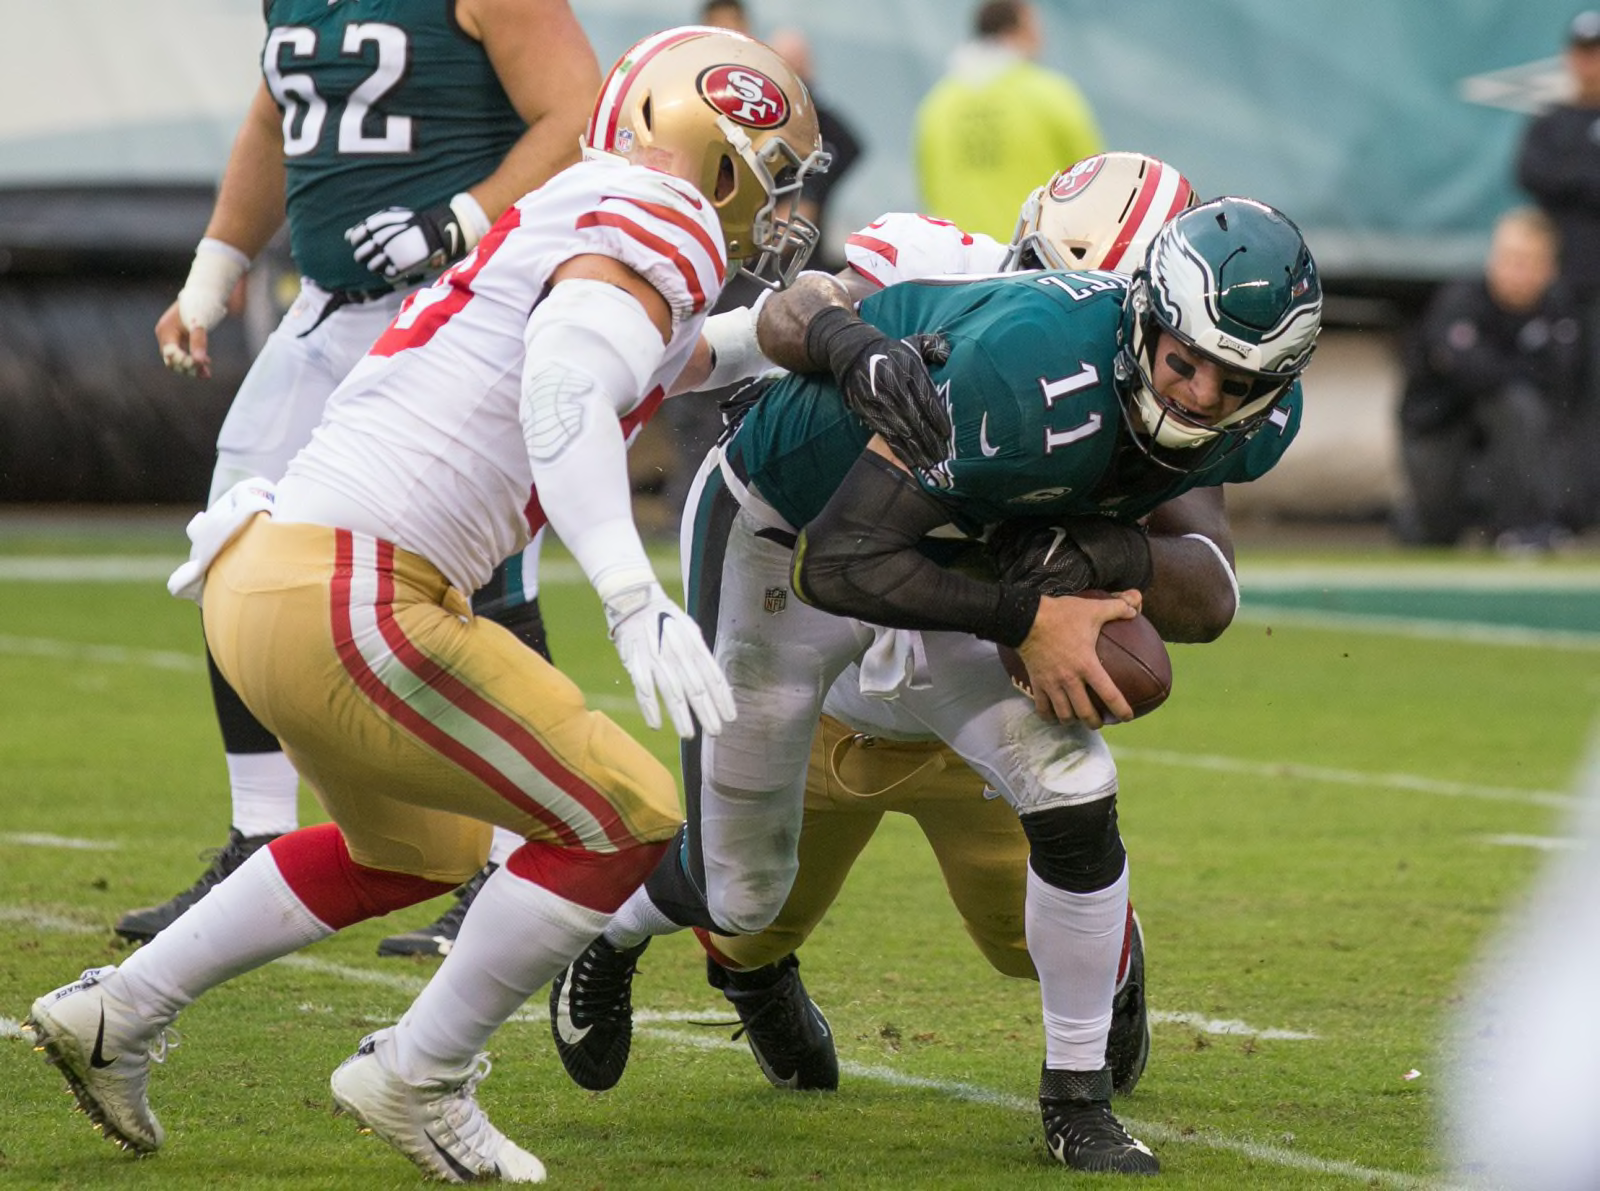 SF 49ers: 5 matchups that will determine Week 4 outcome vs. Eagles